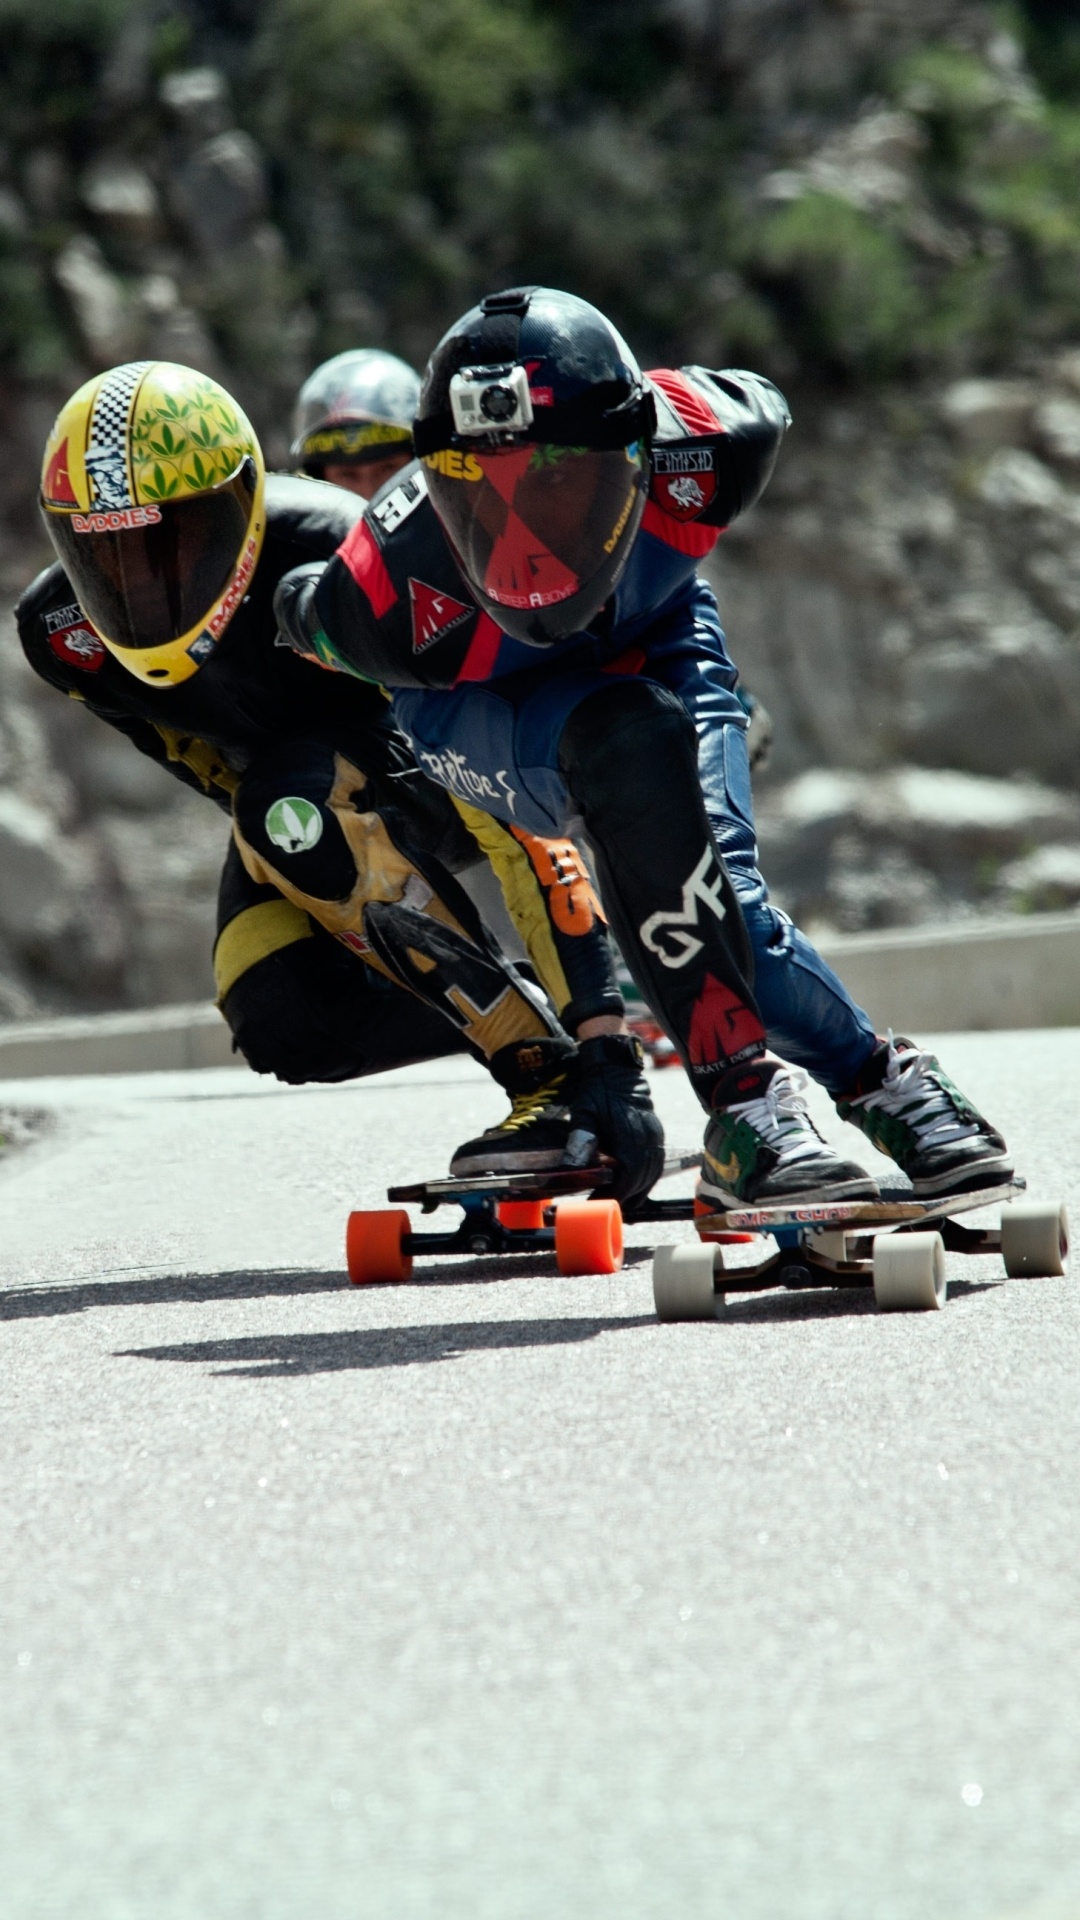 Longboarding: Long-distance skateboard racing, The Broadway Bomb in New York, Extreme competition sport. 1080x1920 Full HD Background.